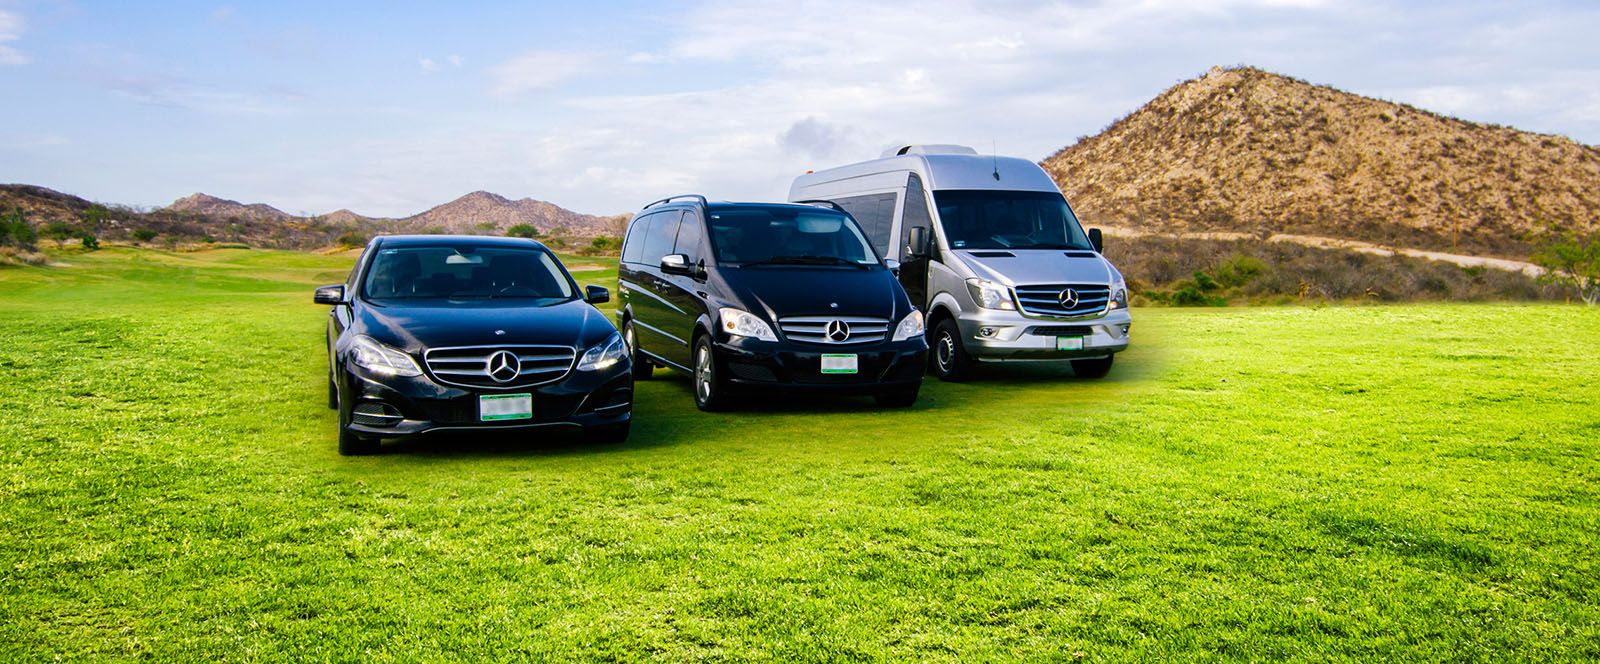 Our Luxury Vehicles